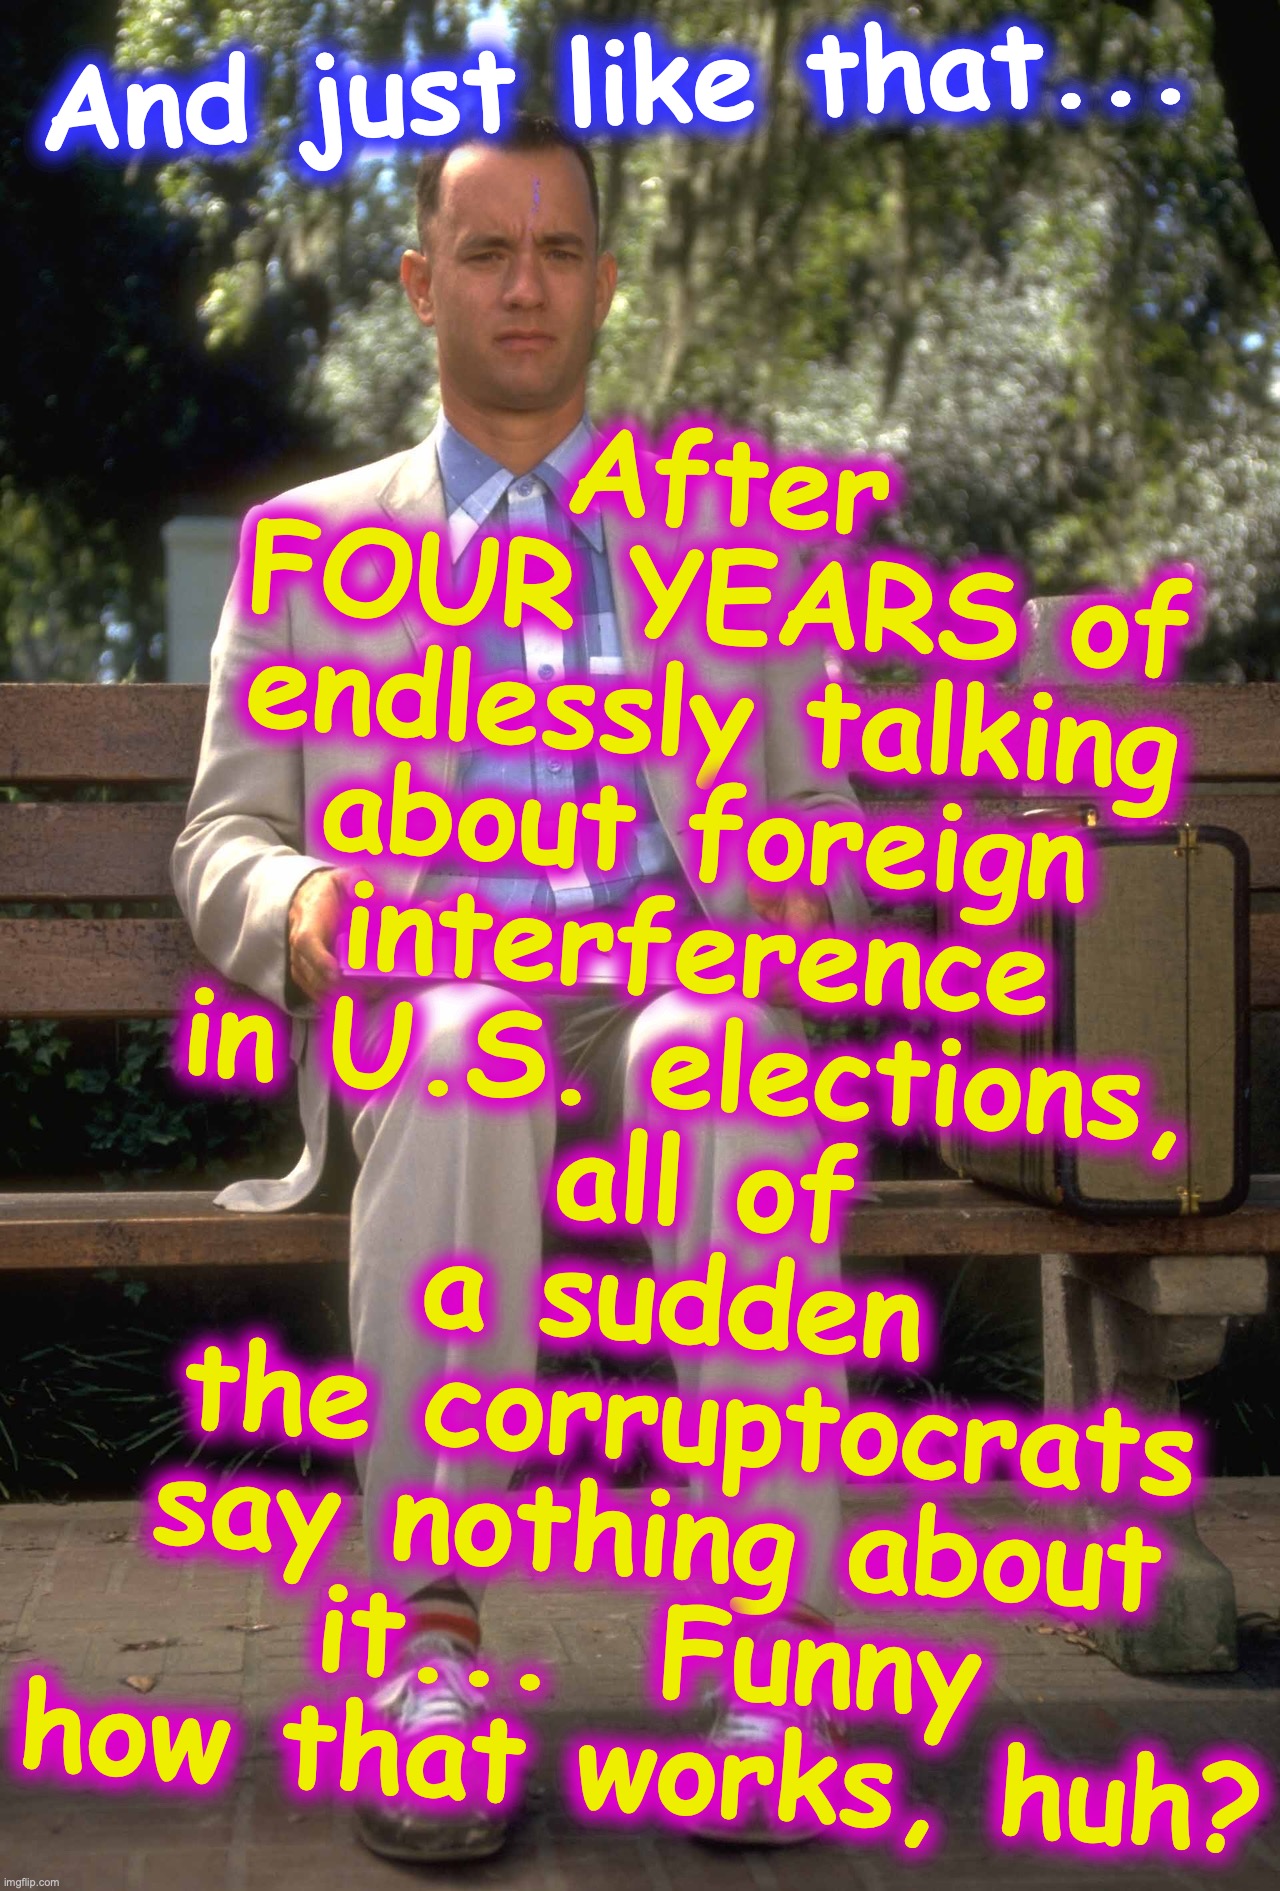 Forrest Gump | After FOUR YEARS of endlessly talking about foreign interference in U.S. elections,
 all of a sudden
 the corruptocrats say nothing about it...  Funny how that works, huh? And just like that... | image tagged in forrest gump | made w/ Imgflip meme maker